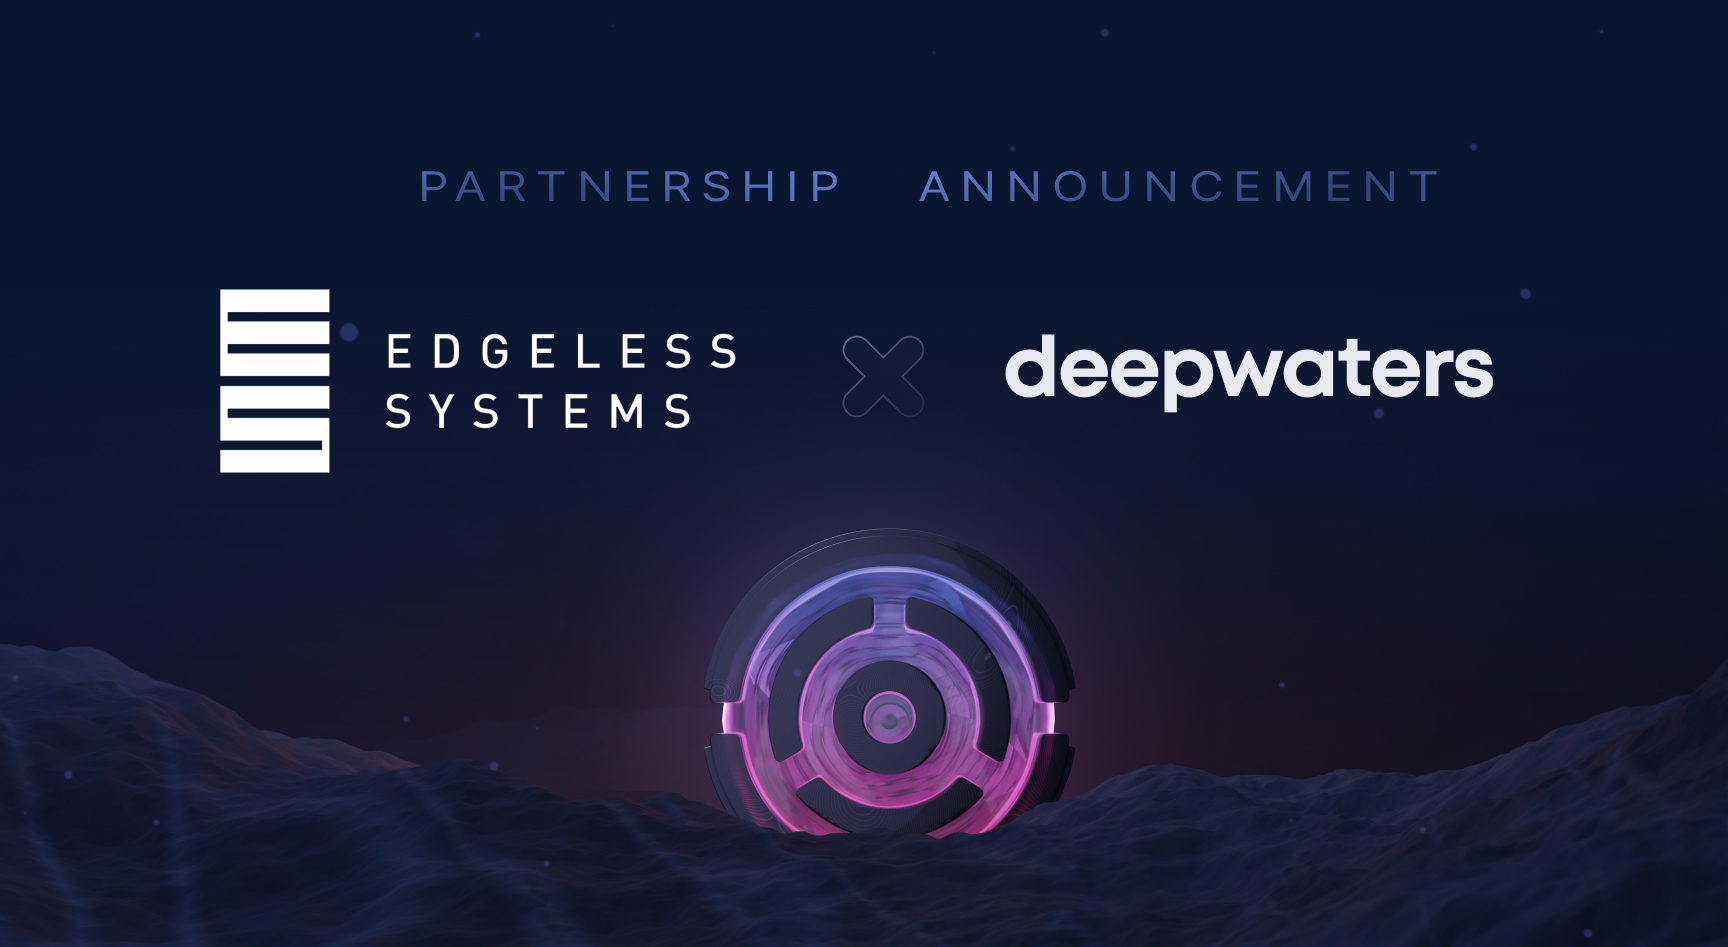 edgeless systems + deepwaters 